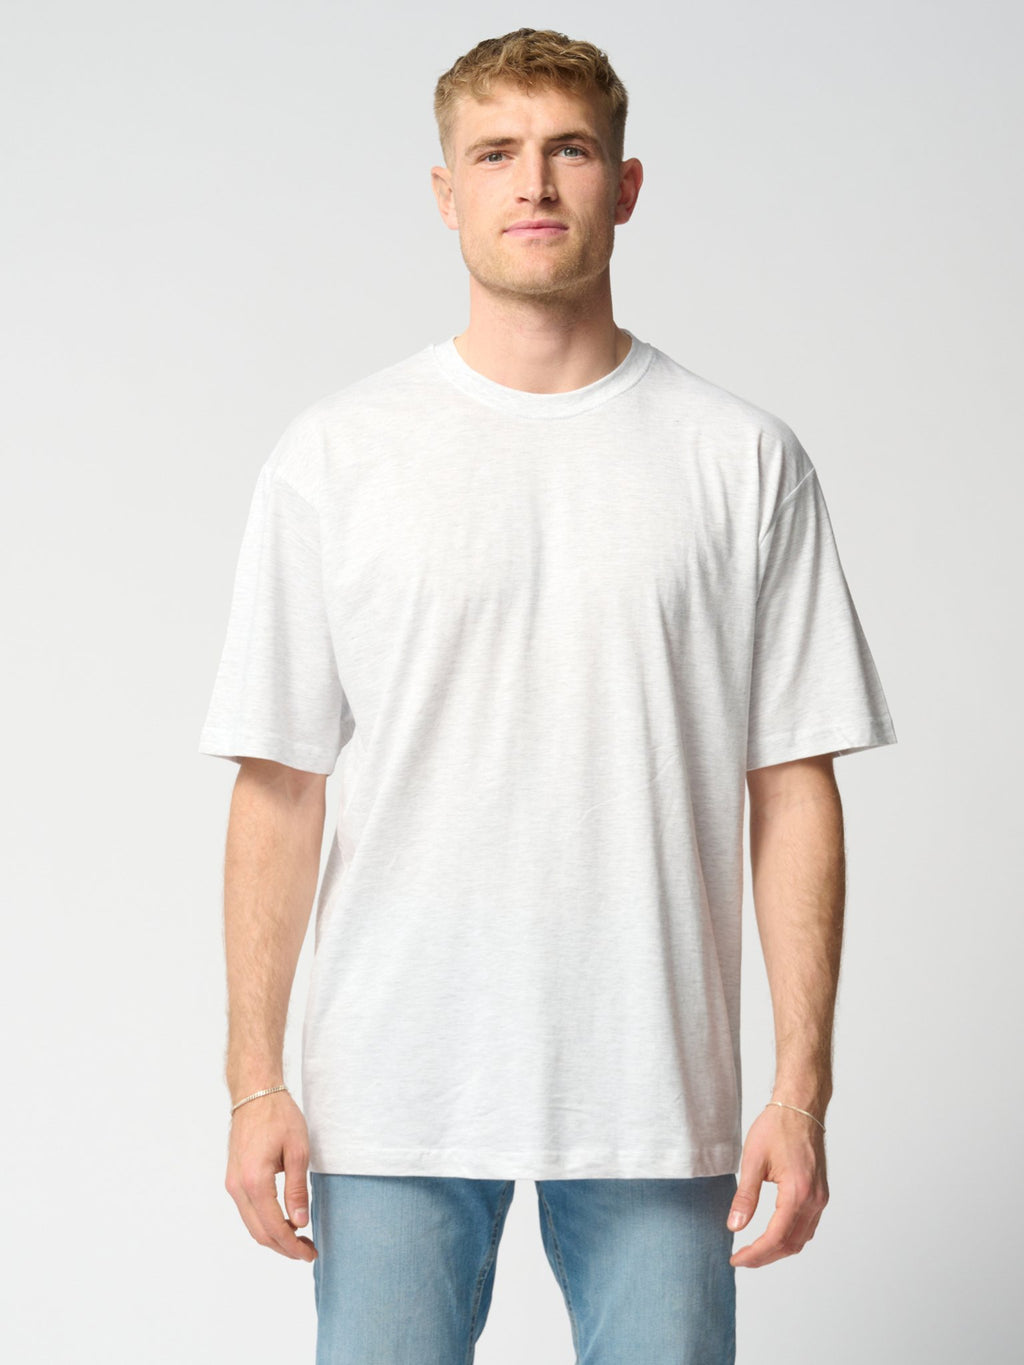 Oversized T-shirts - Package Deal (6 pcs.)